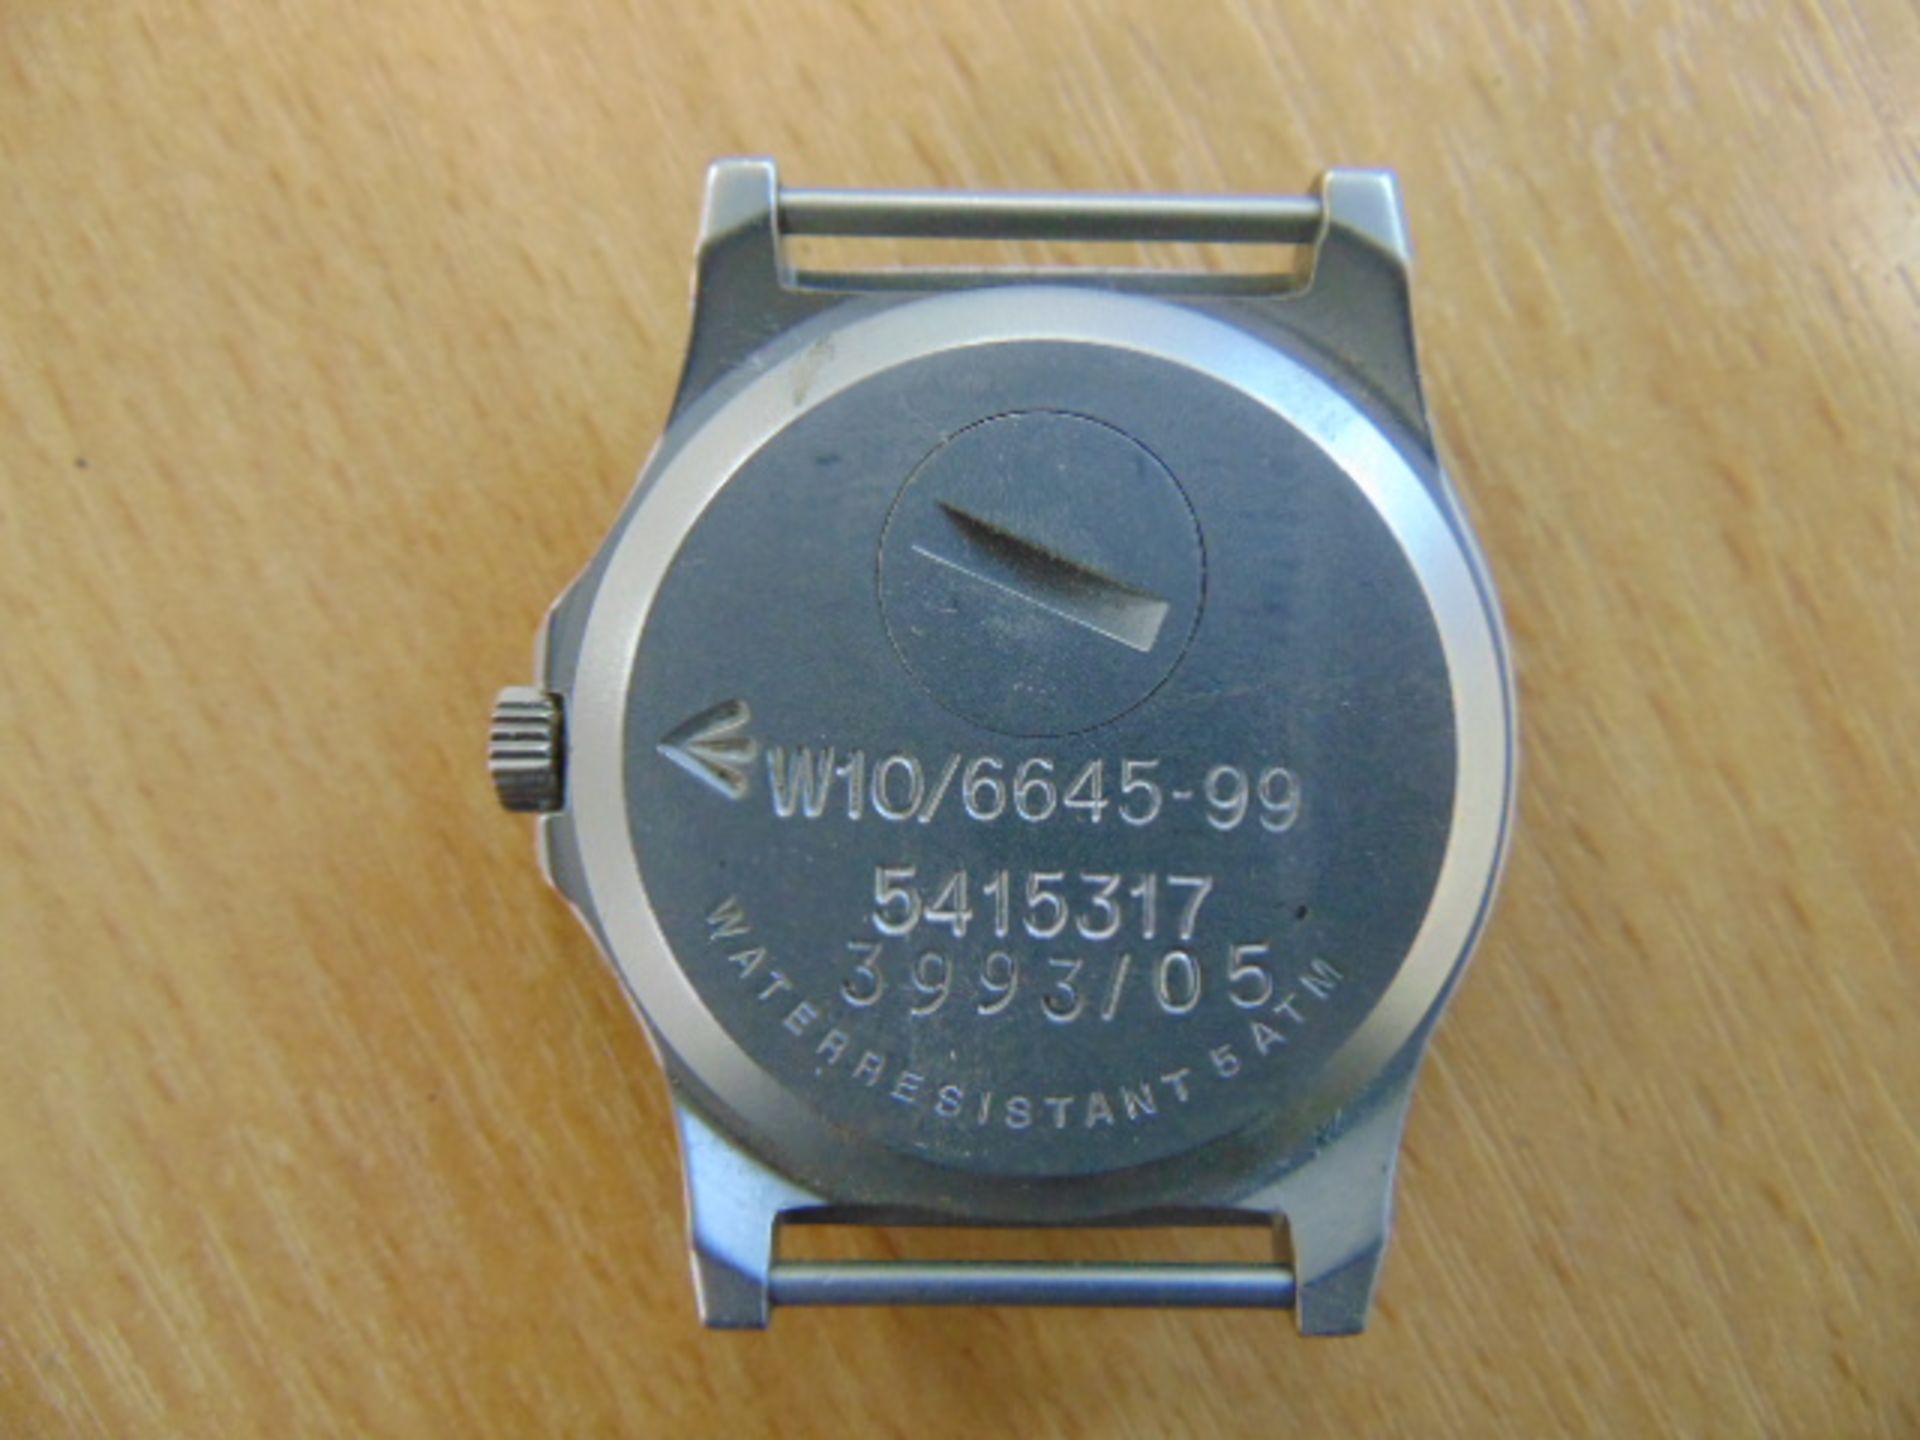 CWC W10 SERVICE WATCH NATO MARKED DATED 2005 WATER RESISTANT TO 5ATM. - Image 5 of 8